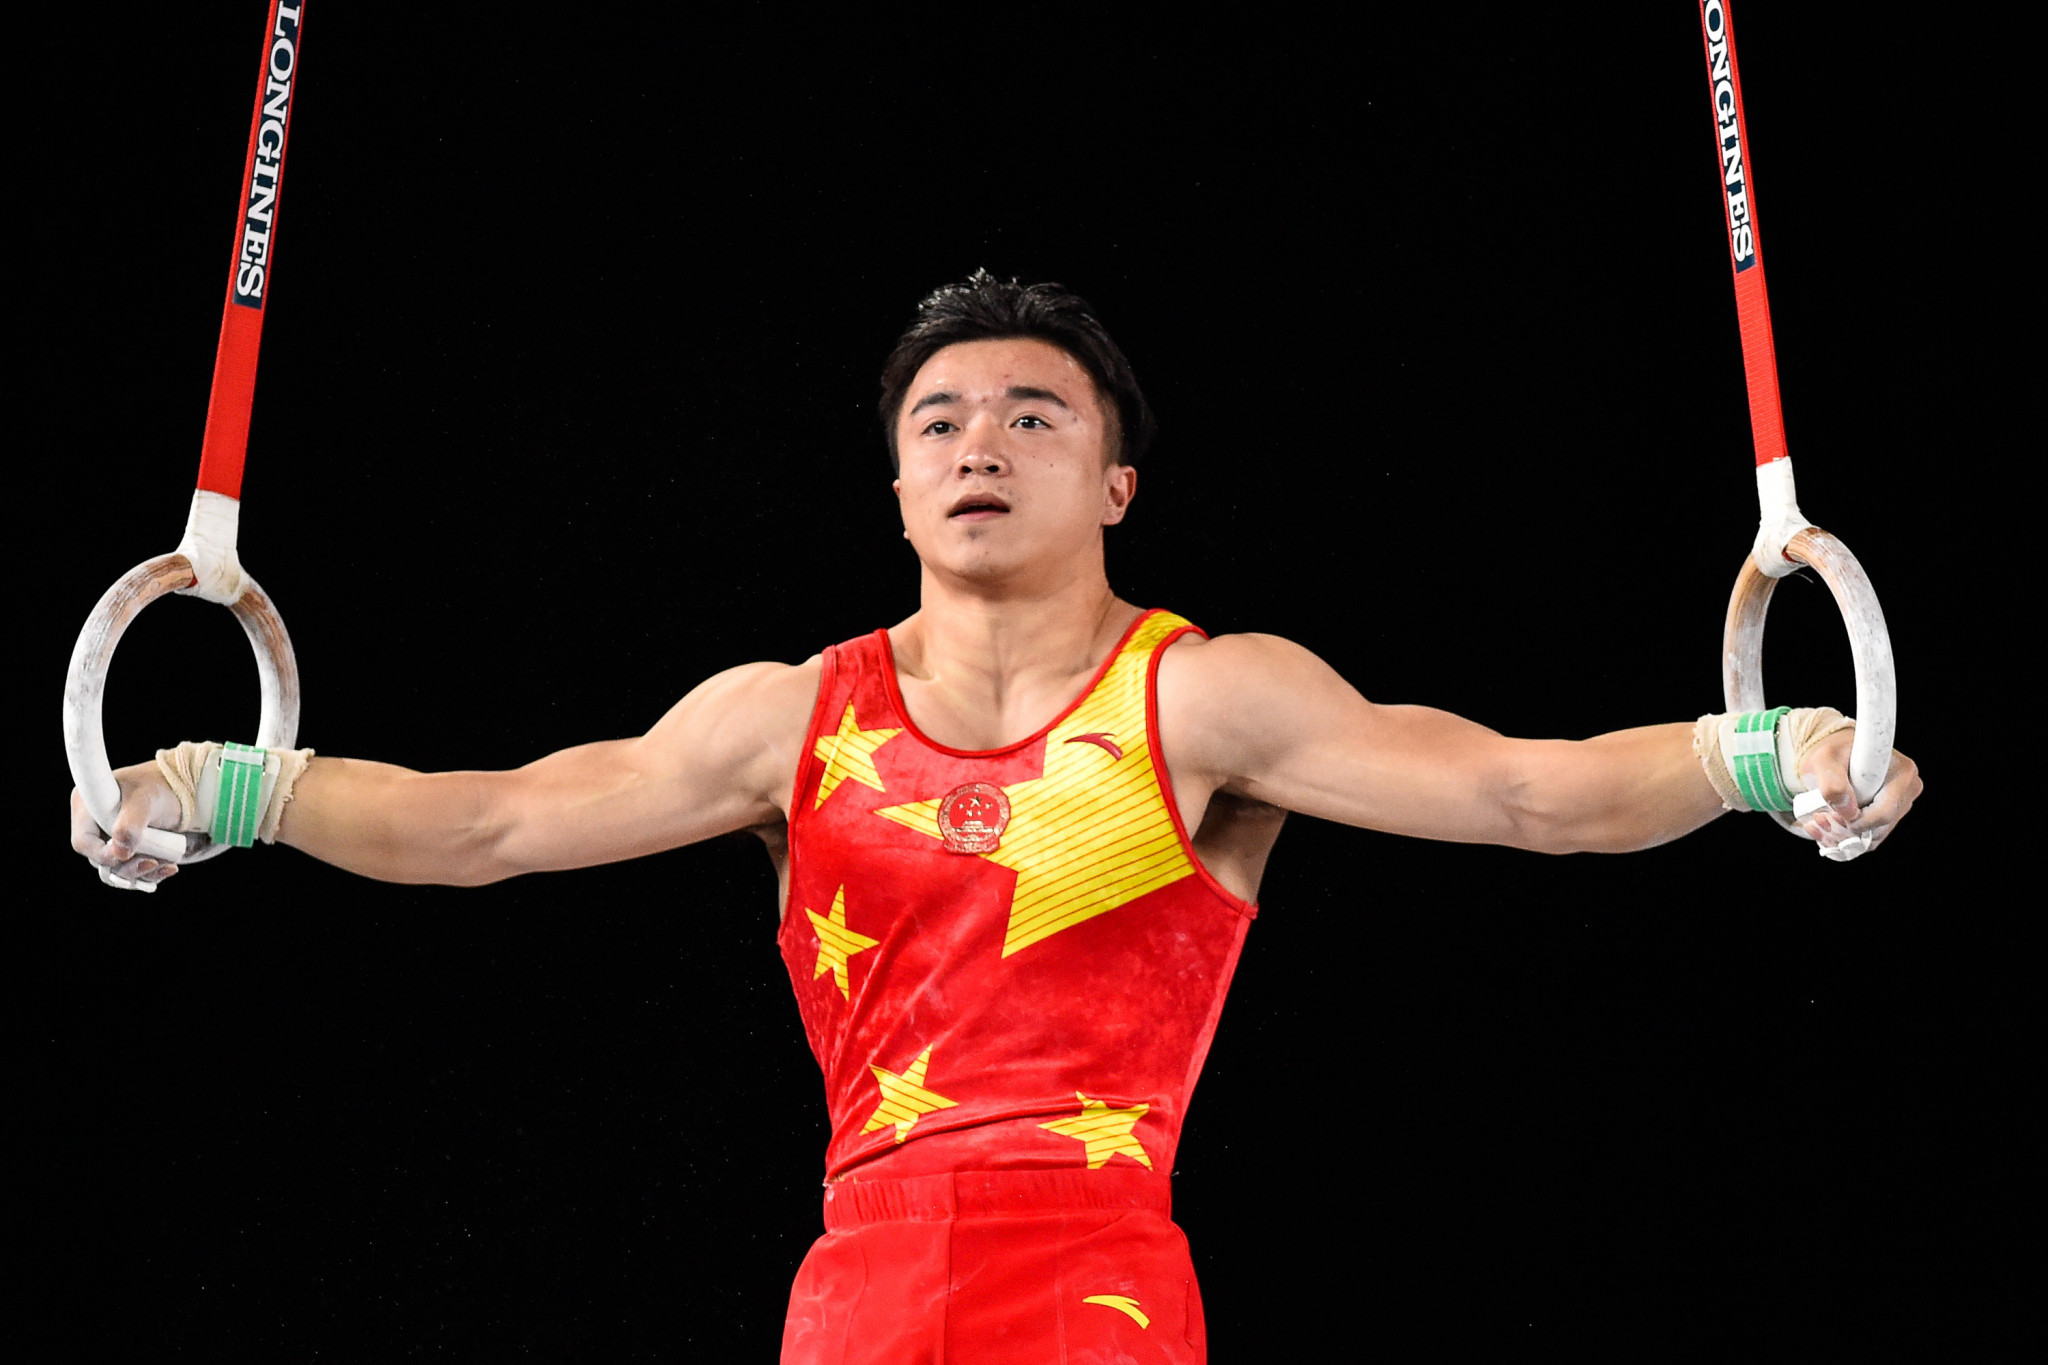 China's Liu Yang topped qualification in the men's rings event on the opening day of the FIG Individual Apparatus World Cup in Melbourne ©Getty Images